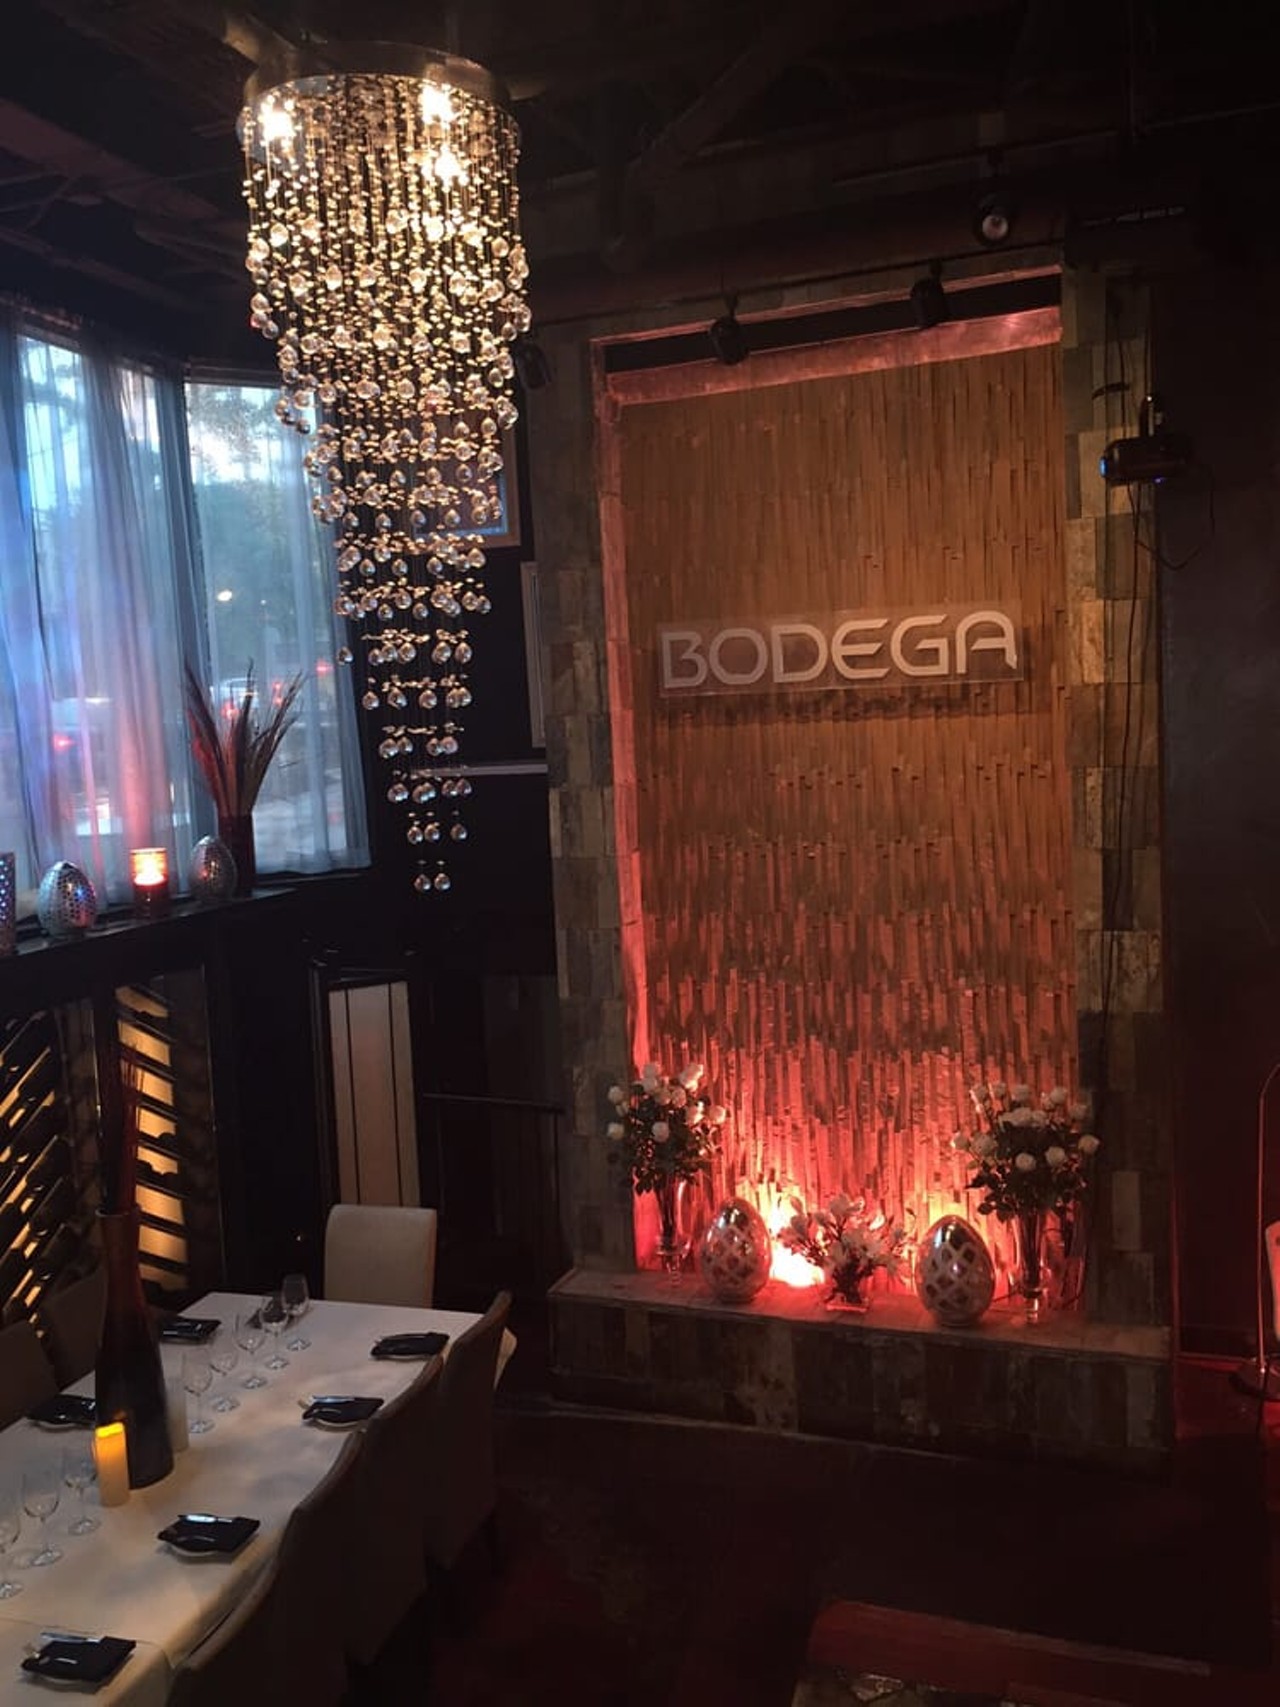  Bodega
1854 Coventry Rd., Cleveland Heights
The sleek, modern feel of this bar makes you think you&#146;re in a Vegas nightclub, not a Cleveland Heights lounge. Also, the drinks are delicious and the food is worth your while, too. 
Photo via Bodega/Yelp